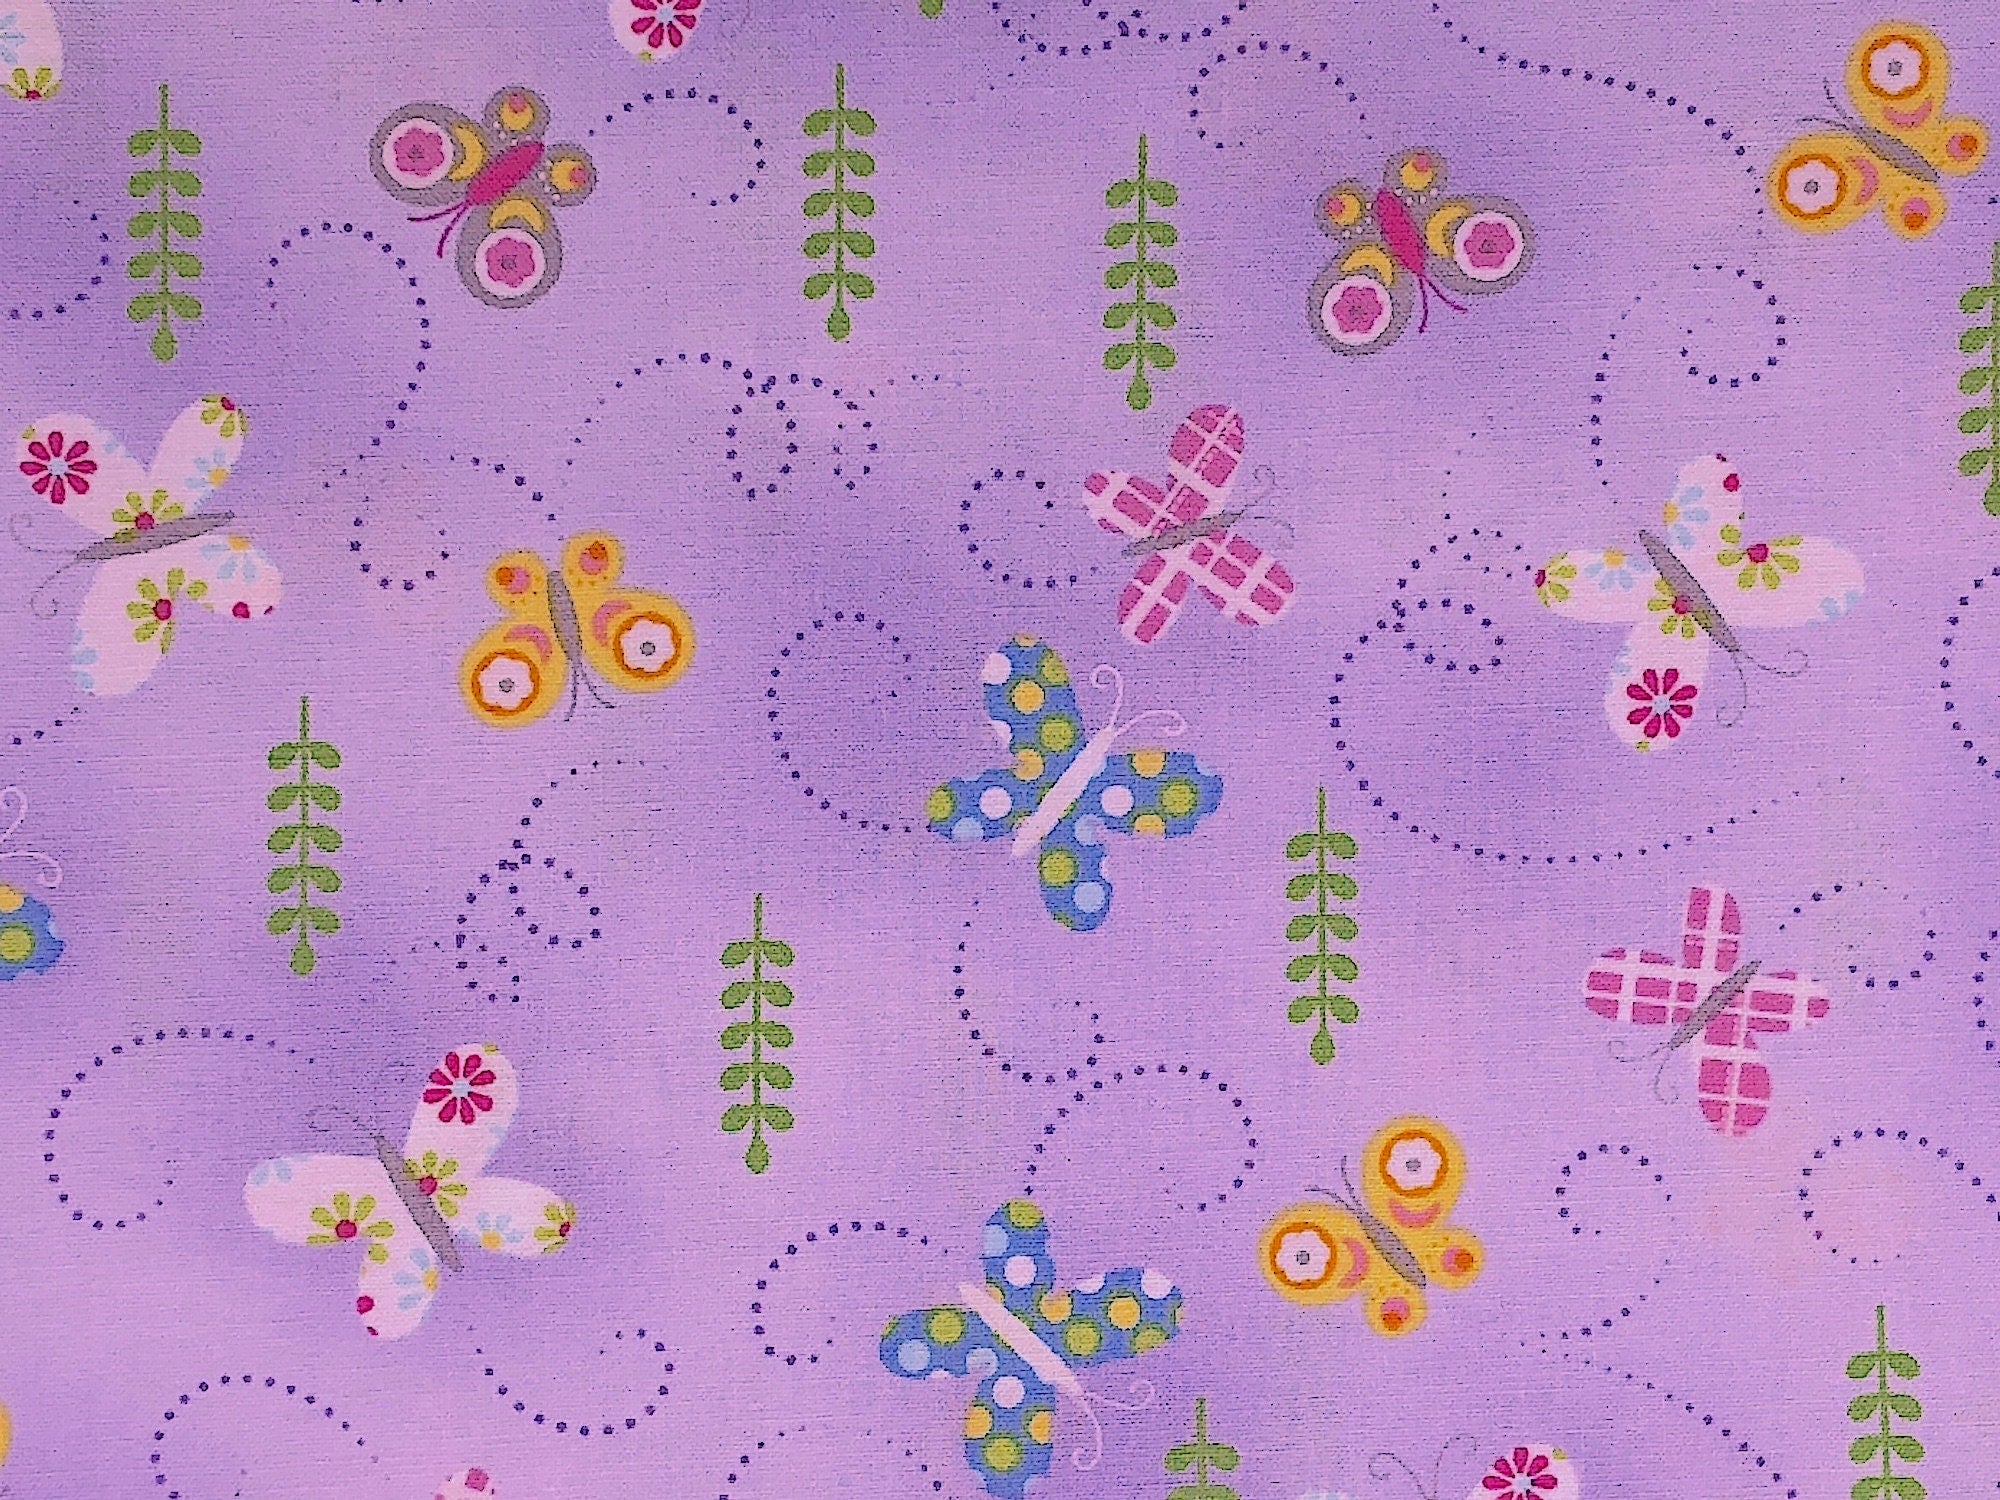 Butterflies on lavender fabric